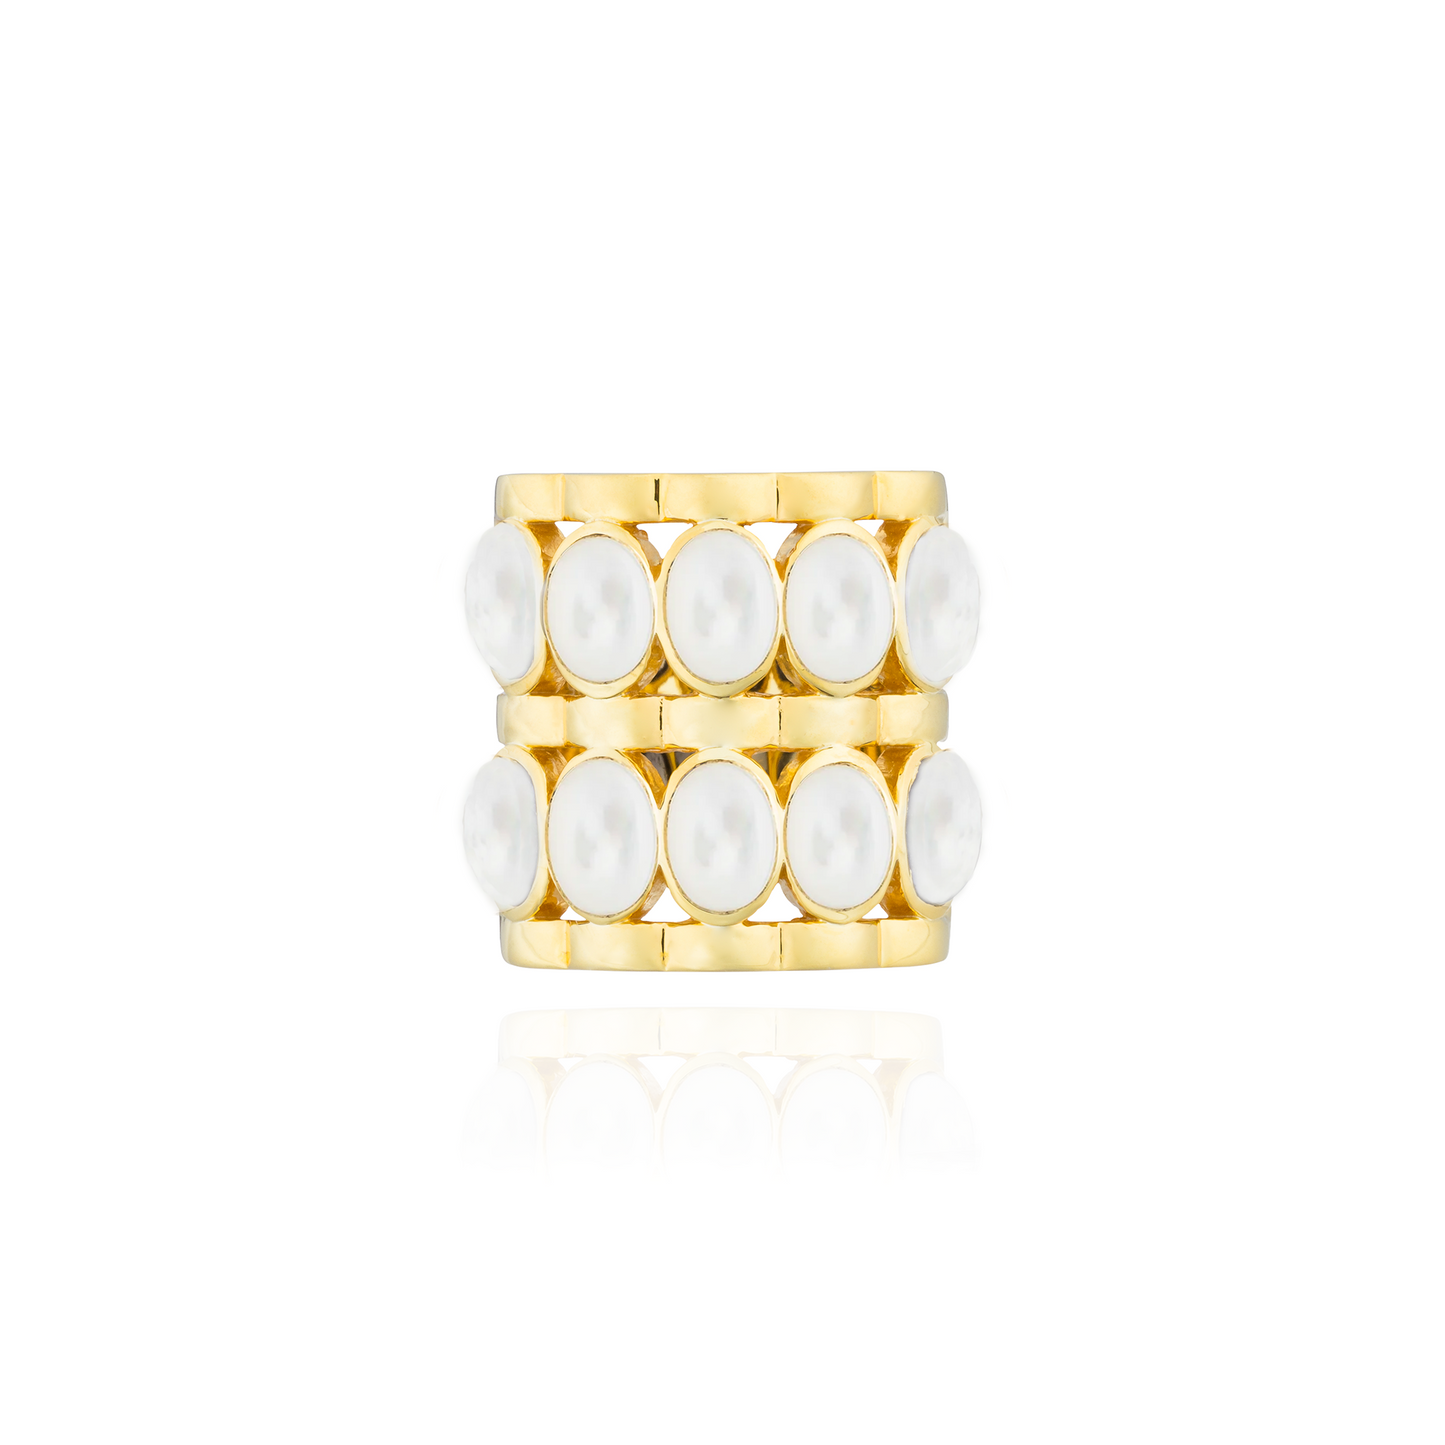 Caramelo 925 Silver Ring Plated in 18K Yellow Gold with Mother of Pearl Cabochons